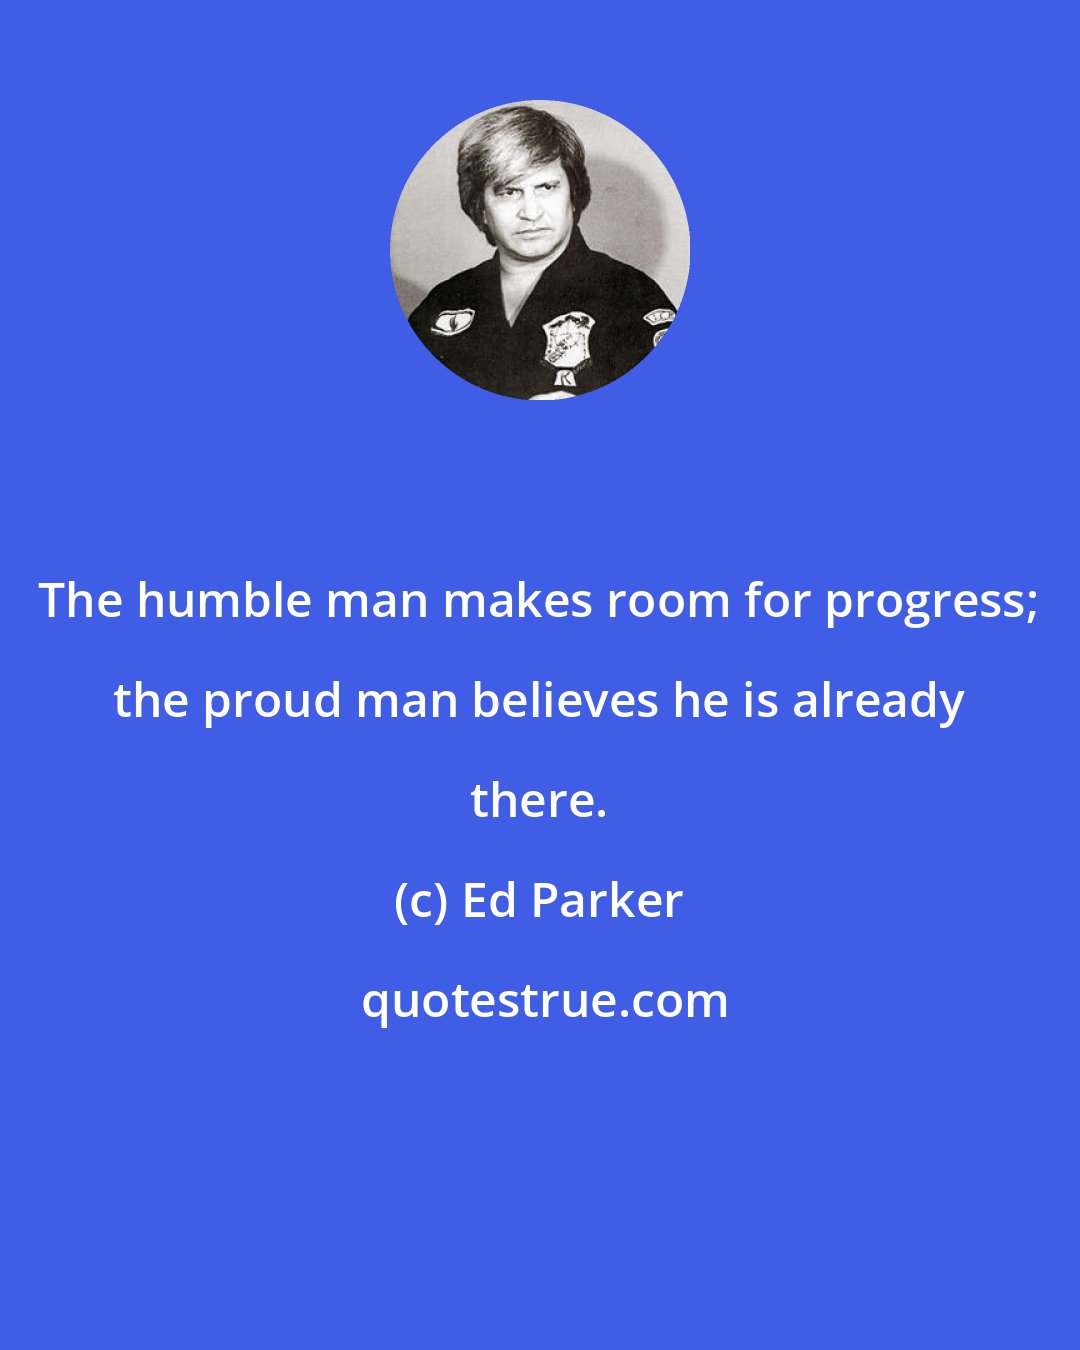 Ed Parker: The humble man makes room for progress; the proud man believes he is already there.